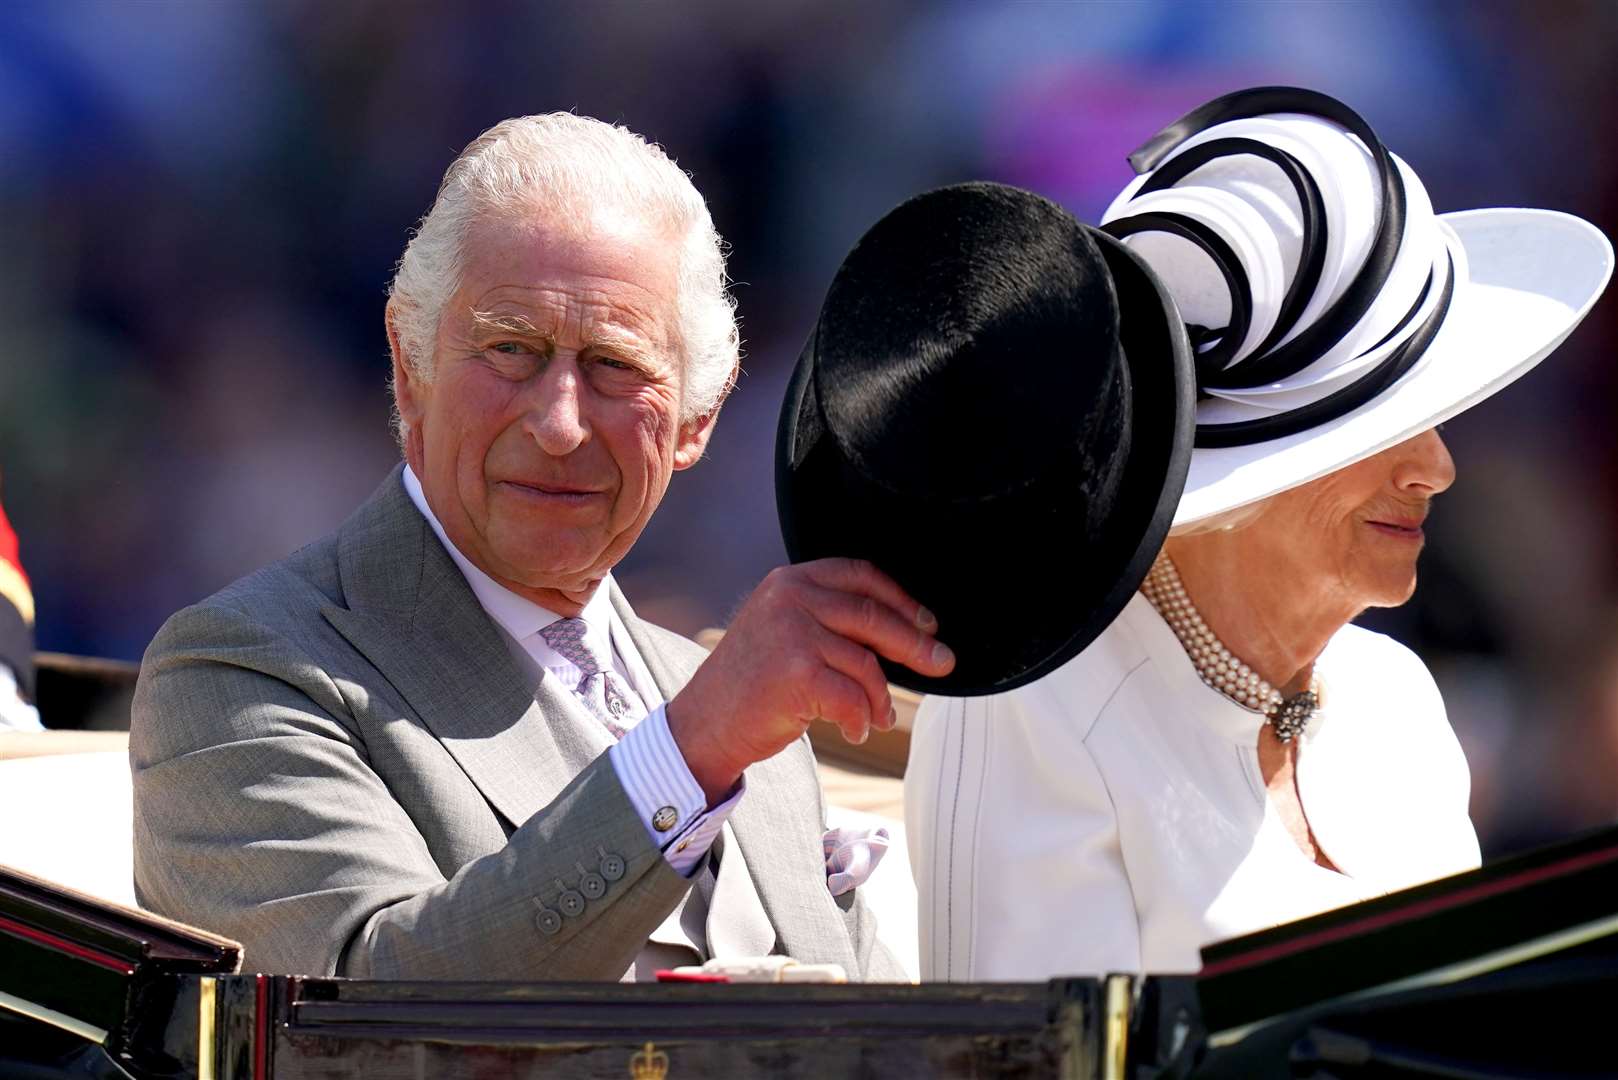 The King and Queen arrive by carriage at Royal Ascot (John Walton/PA)